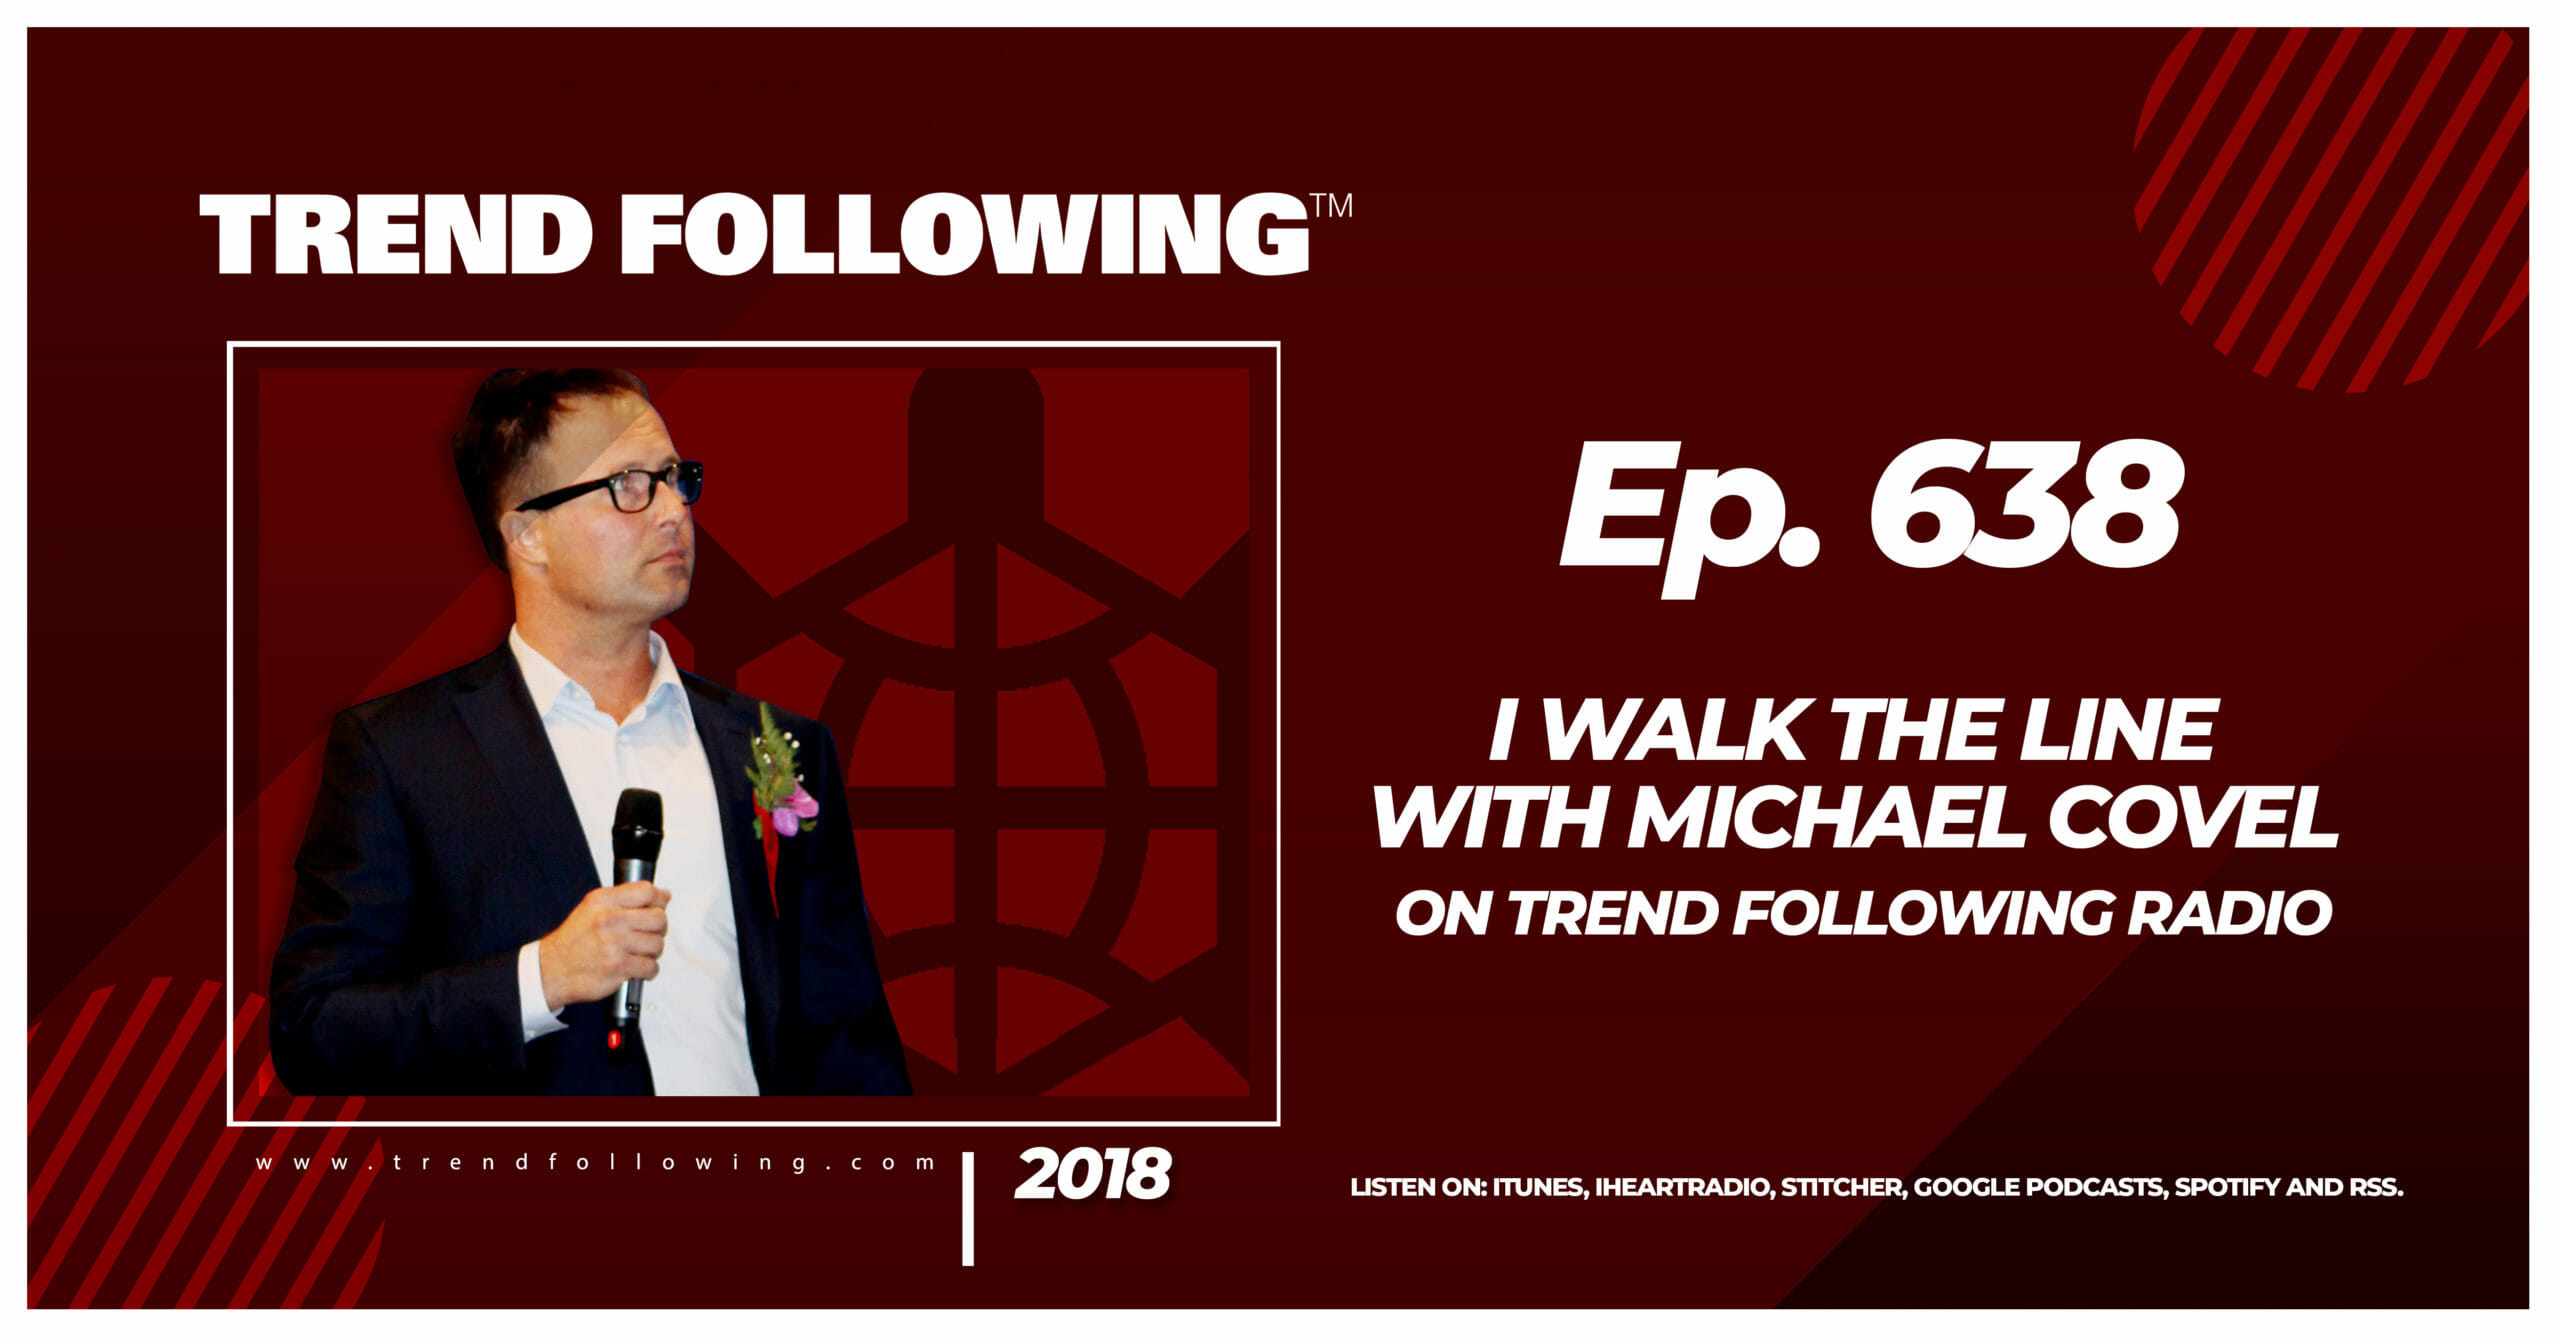 I Walk the Line with Michael Covel